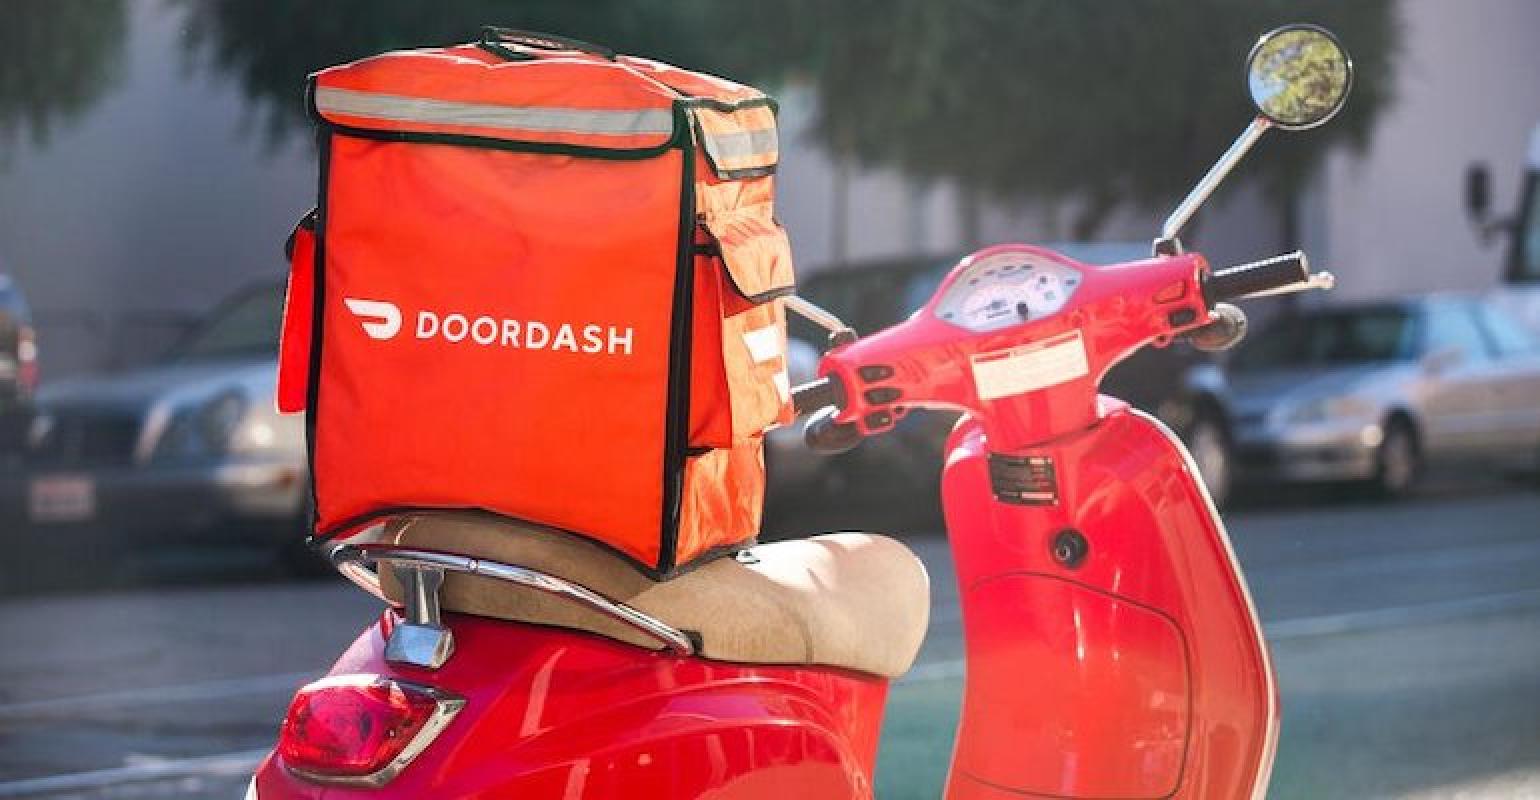 DoorDash makes foray into ondemand grocery delivery Supermarket News